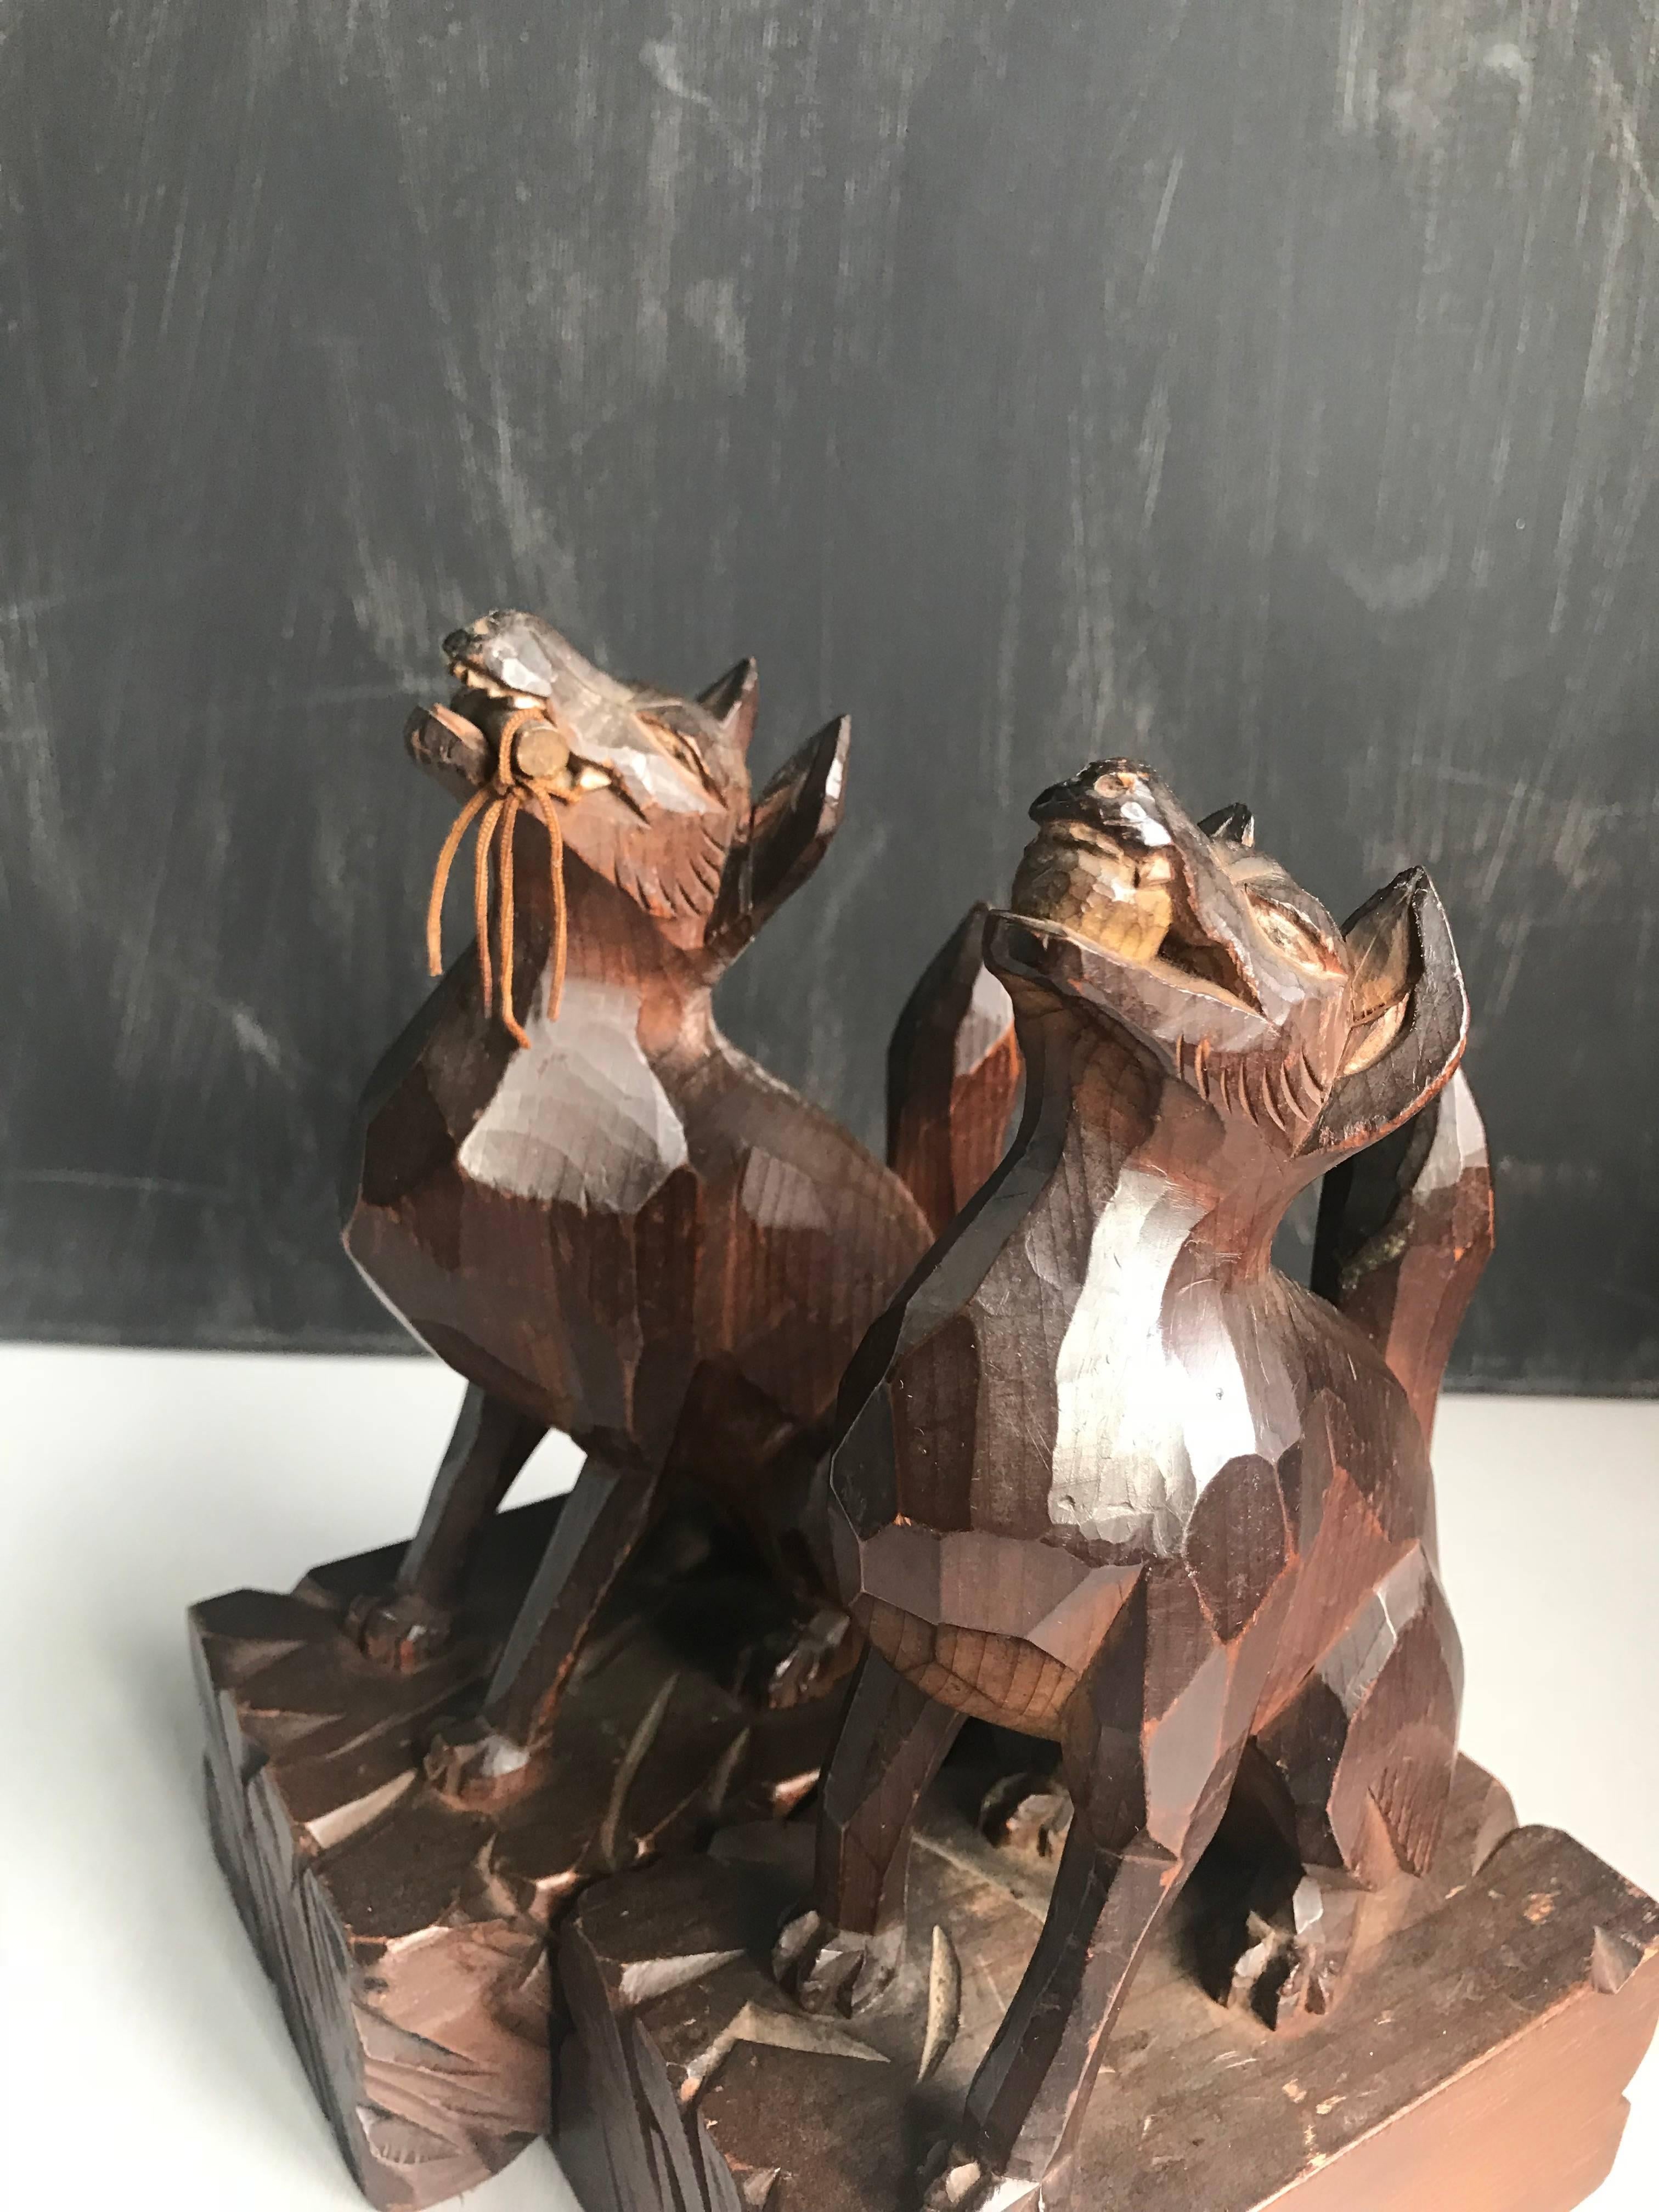 Arts and Crafts Early 1900 Hand-Carved and Stylized Dogs Playing Fetch Sculptures, Pair Bookends For Sale